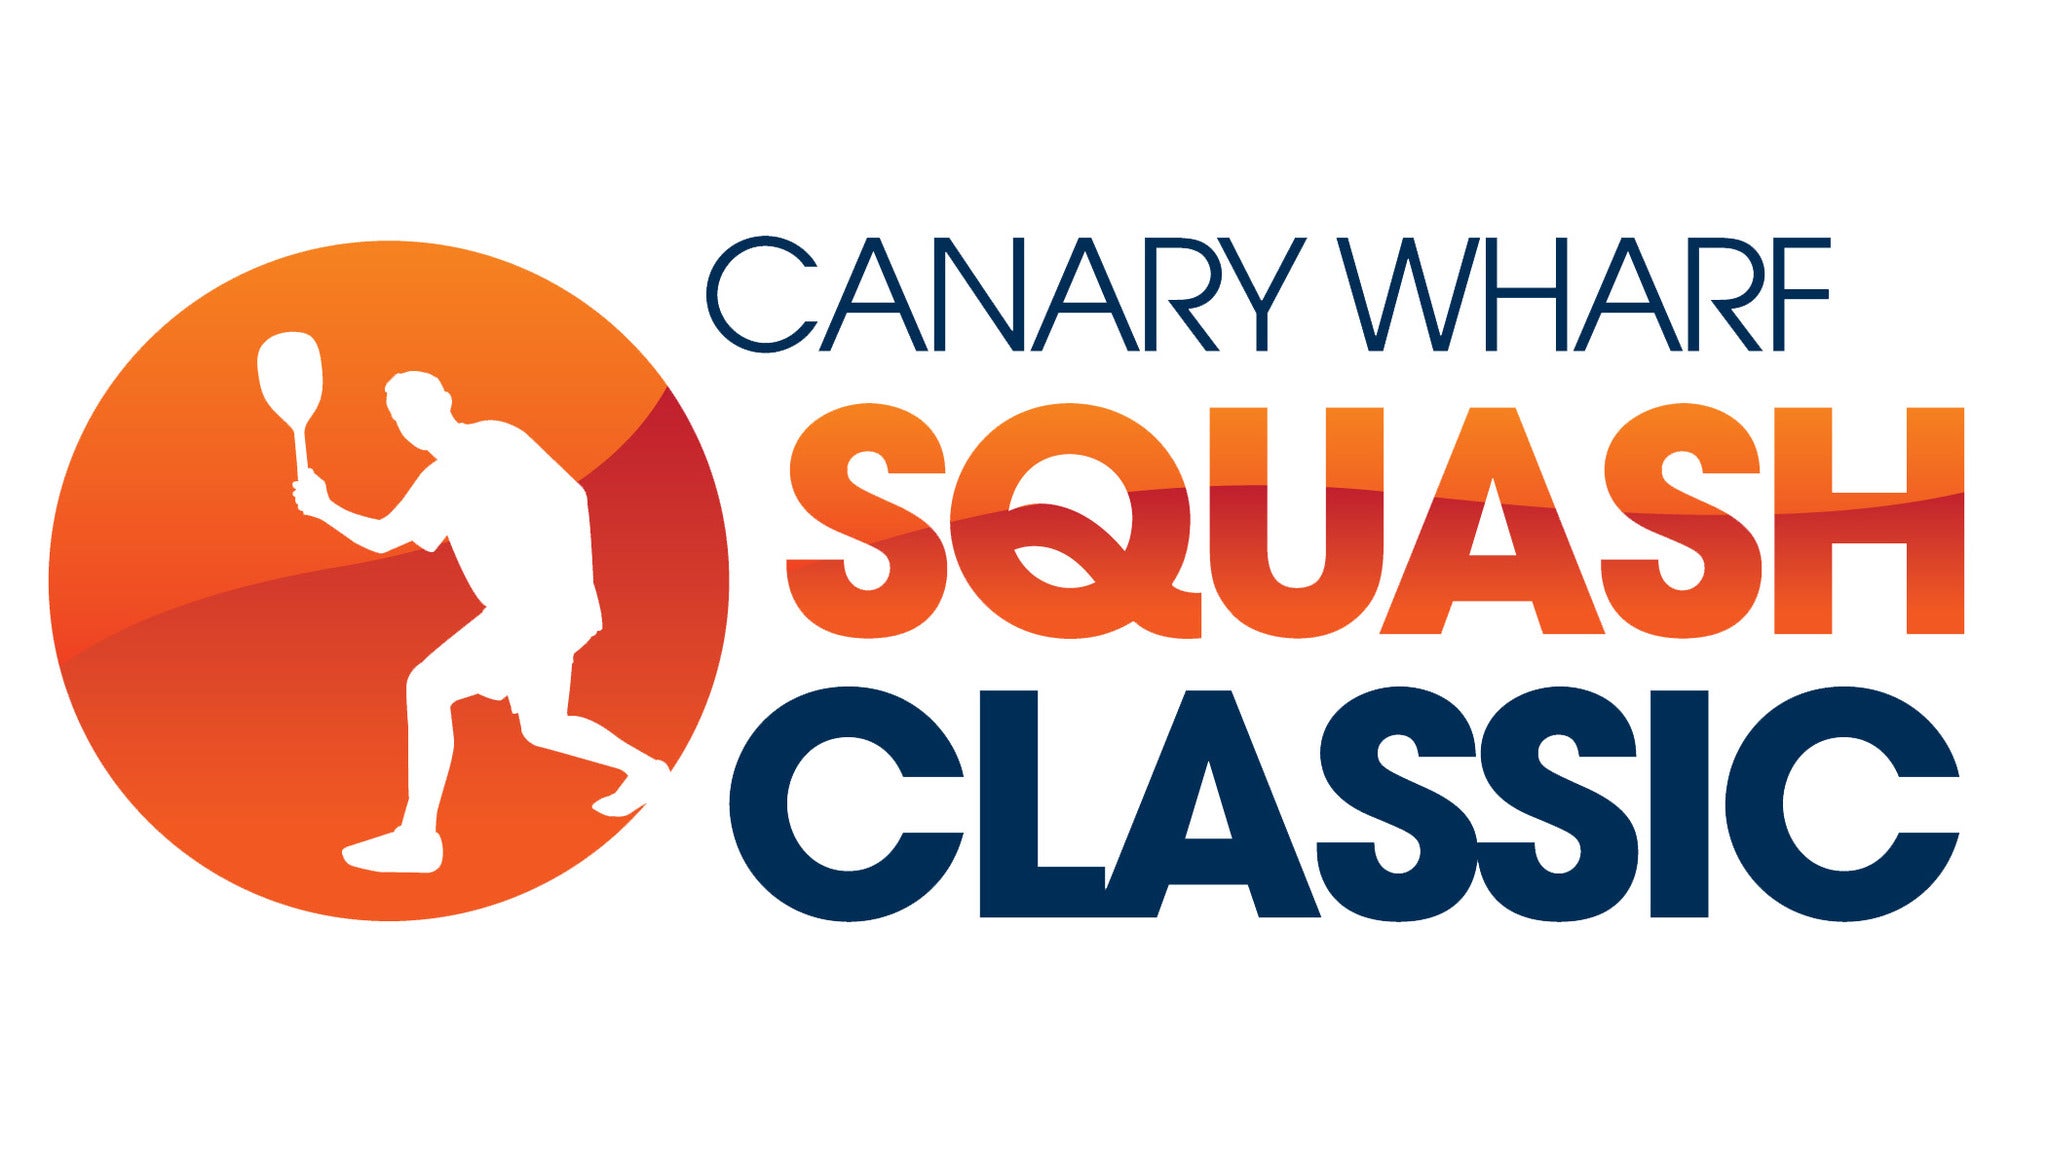 St. James's Place Canary Wharf Squash Classic Event Title Pic